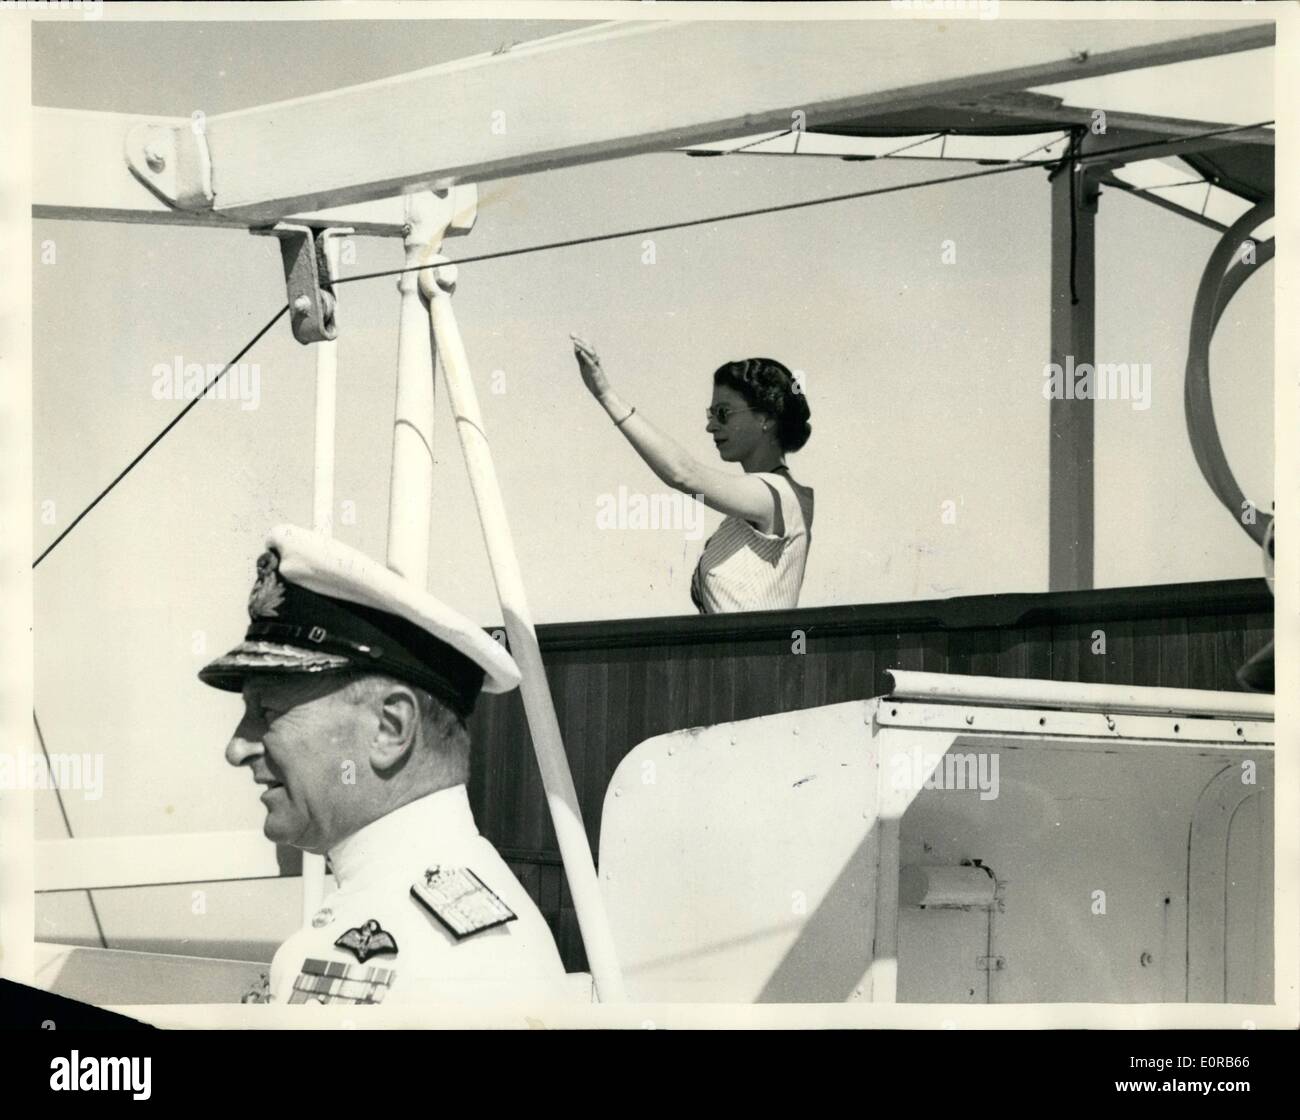 Dec. 12, 1958 - The Royal Tour - Original Picture: The H.M.N.Z.S. Black Prince took over escort duty to the royal tour liner ''Gothic'' in the Pacific, when H.M. The Queen and The Duke of Edinburgh were enroute for Suva. Photo shows H.M. The Queen on the bridge of the ''Gothic'' wavesa greeting to the Black Prince as it took over the escort duty. Stock Photo